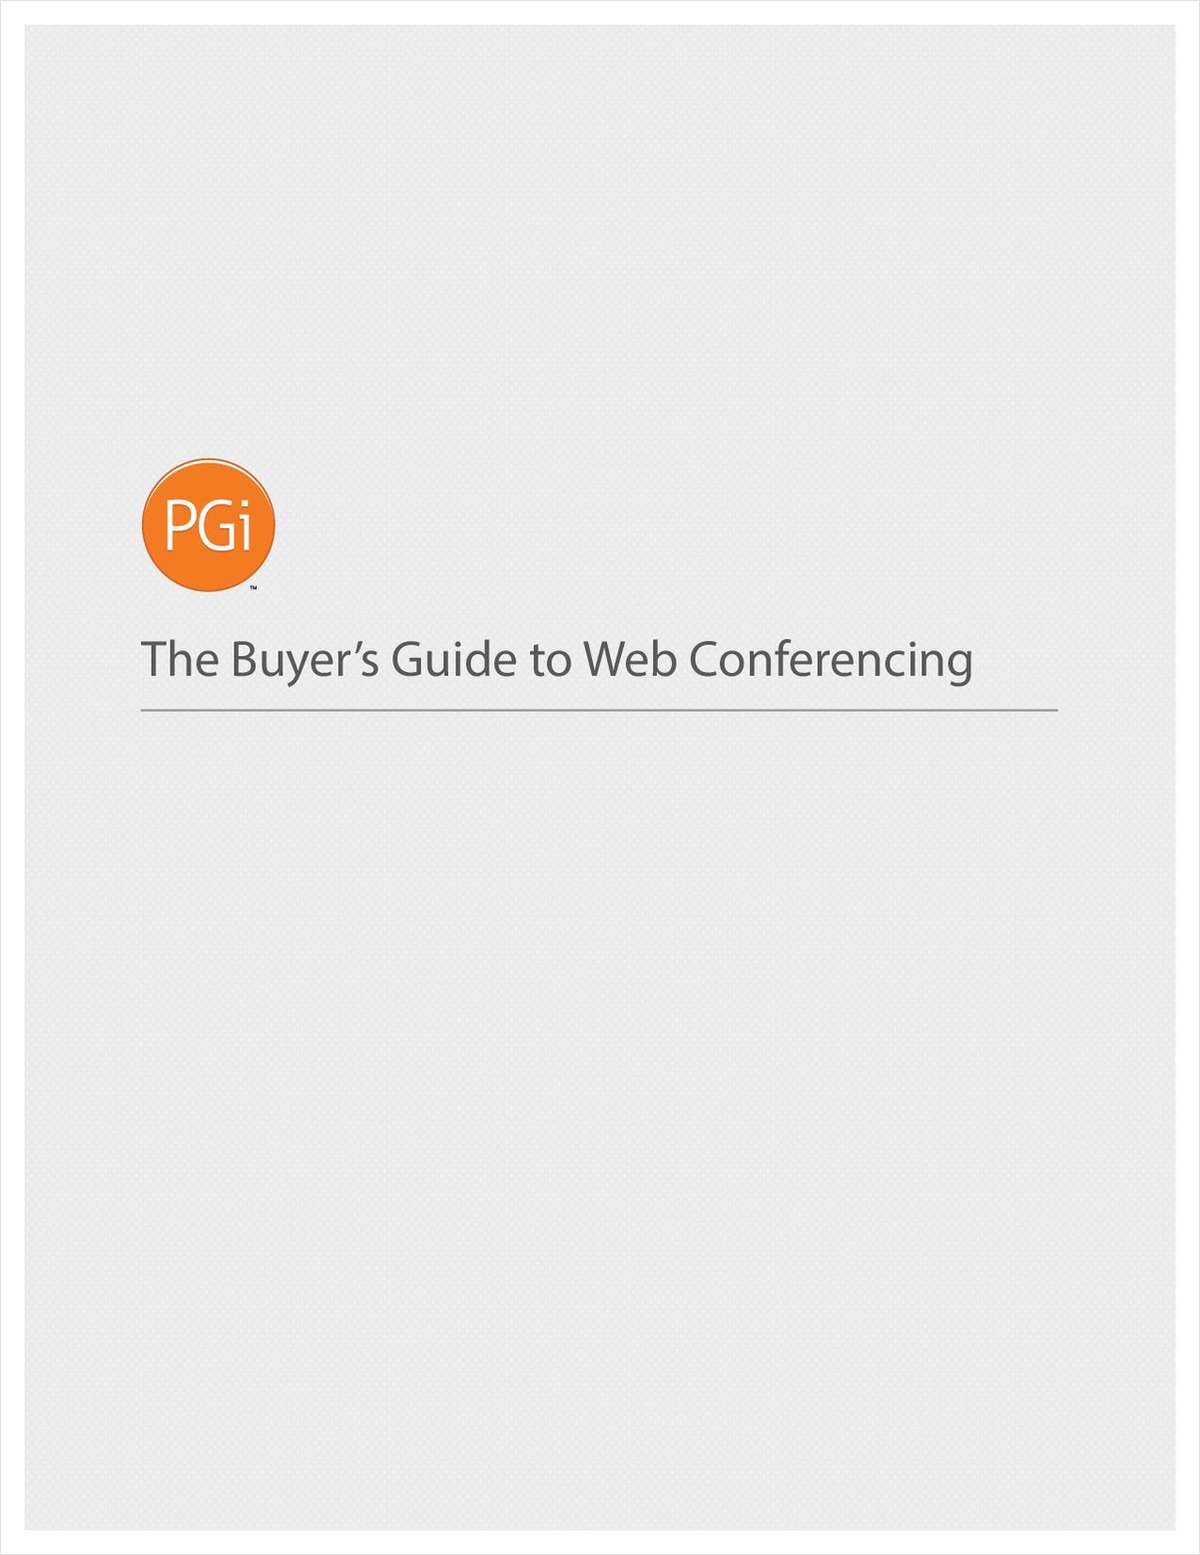 Web Conferencing Buyer's Guide